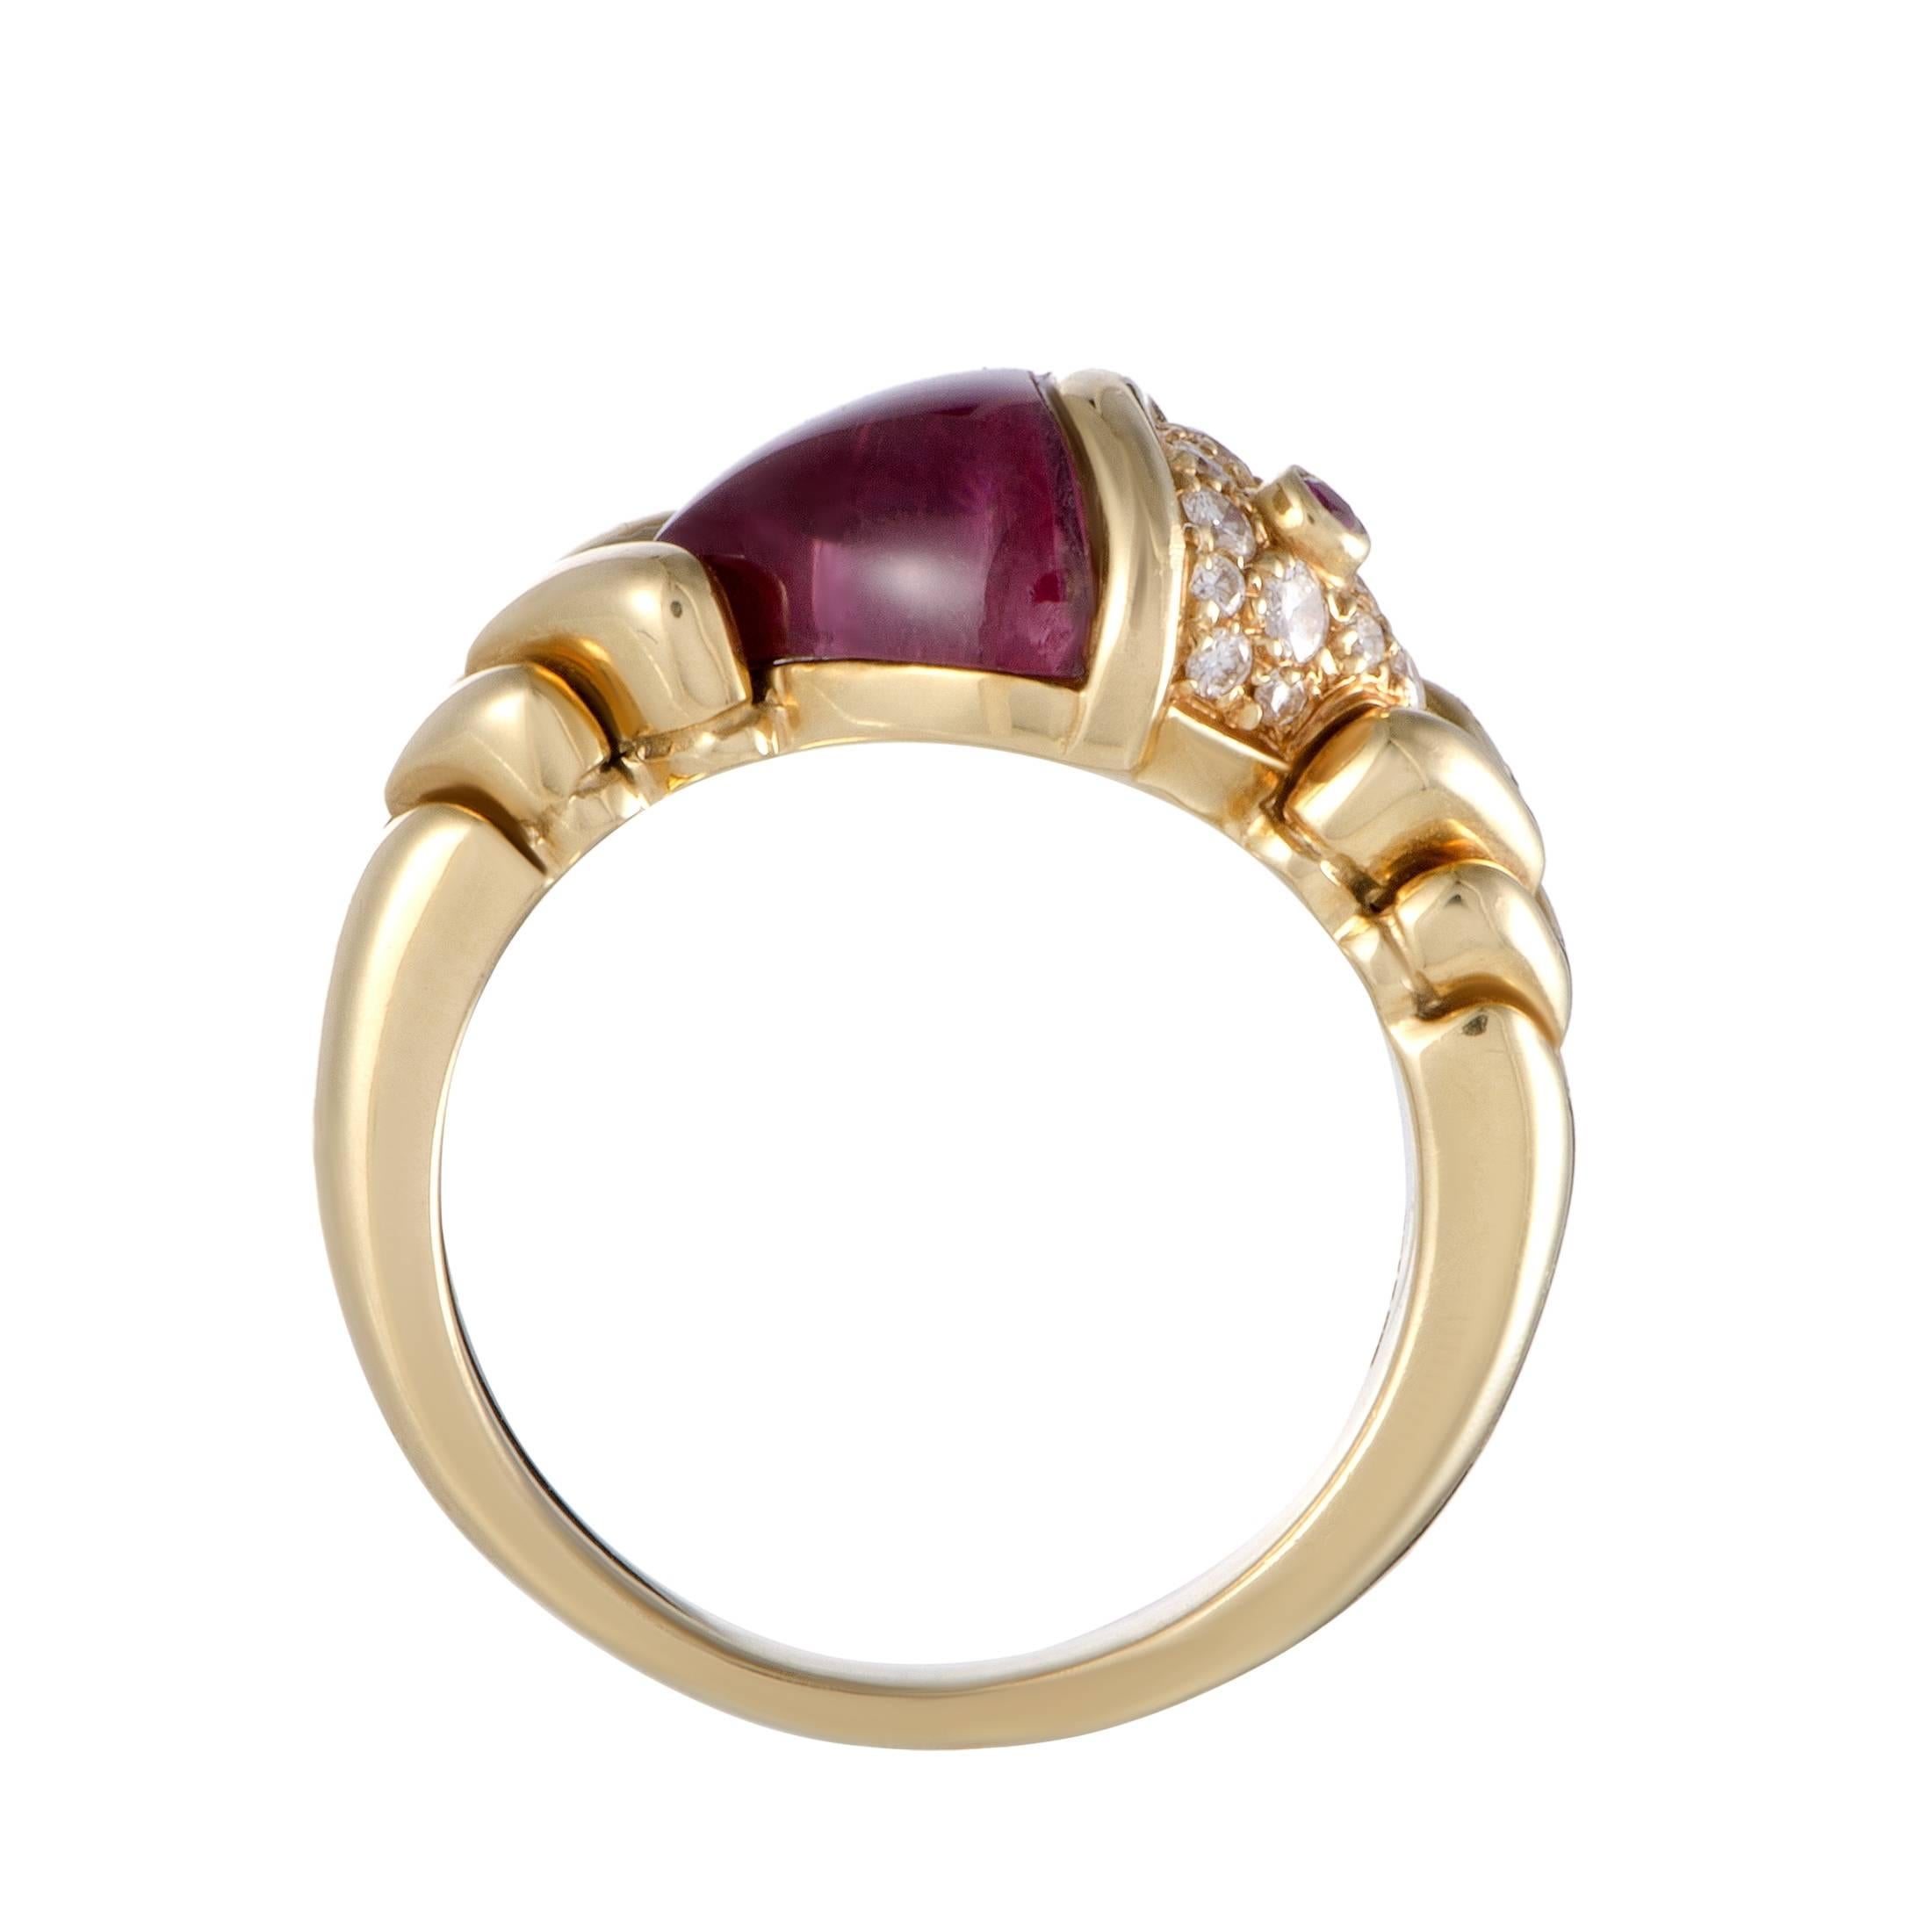 This spectacular 18K yellow gold ring by Bulgari epitomizes class and elegance. The stunning design includes sparkling 0.30ct diamonds, a gorgeous ruby and a mesmerizing pink tourmaline stone that gives the ring an extravagantly stylish appeal.